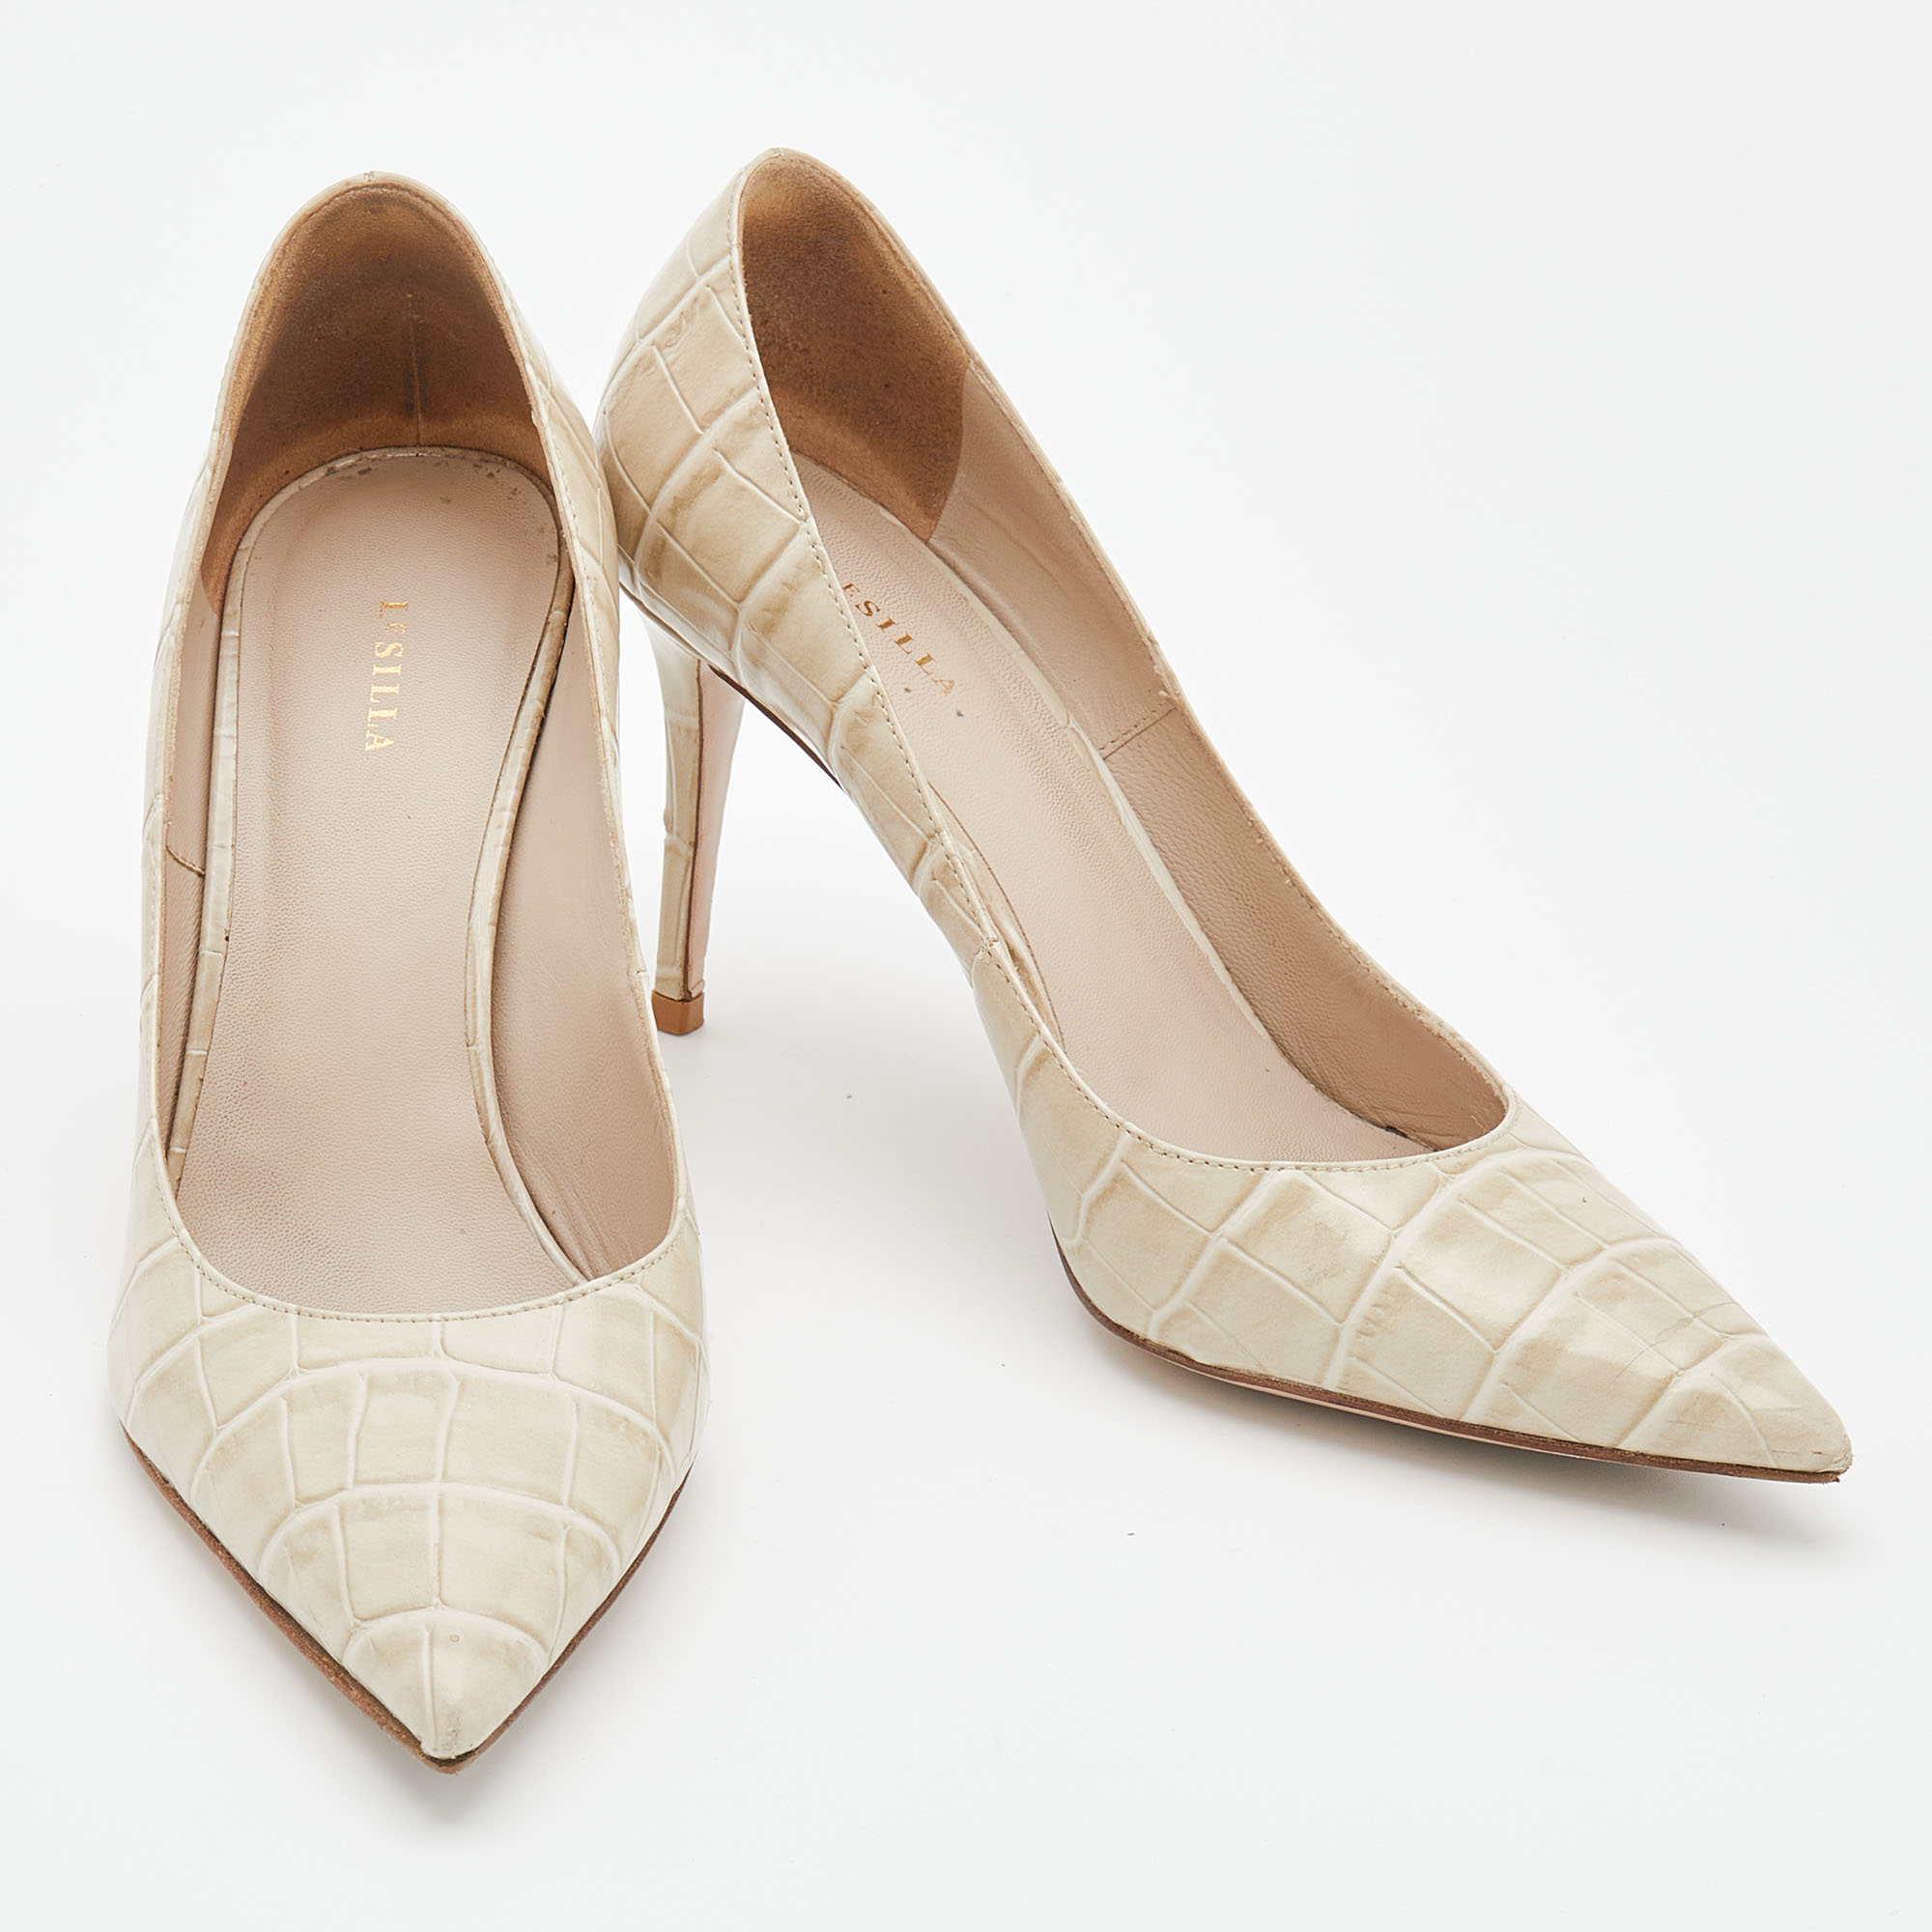 Le Silla Off-White Croc Embossed Leather Eva Pointed Toe Pumps Size 36